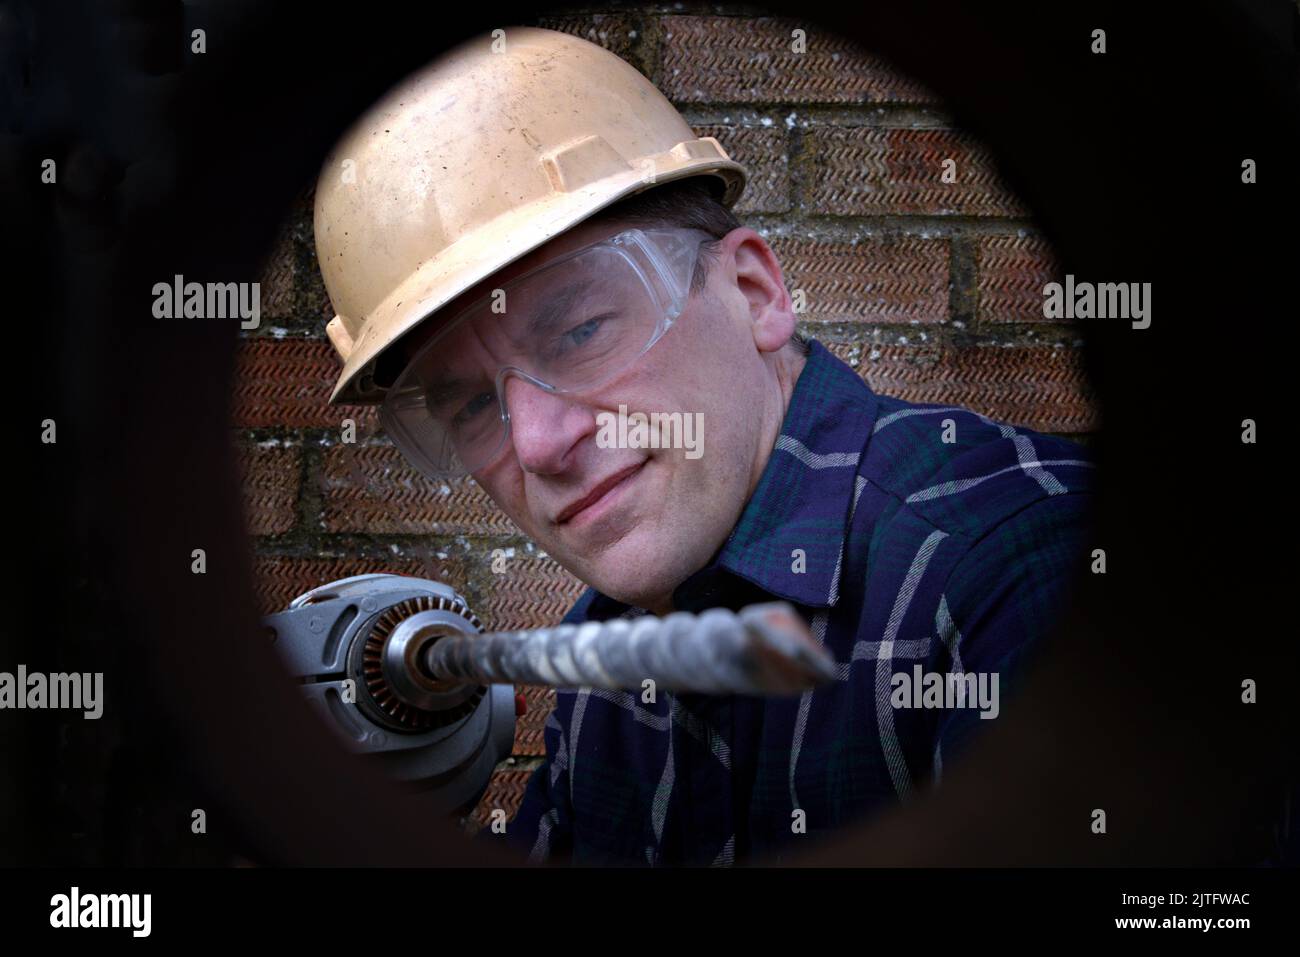 Man drilling a hole Stock Photo